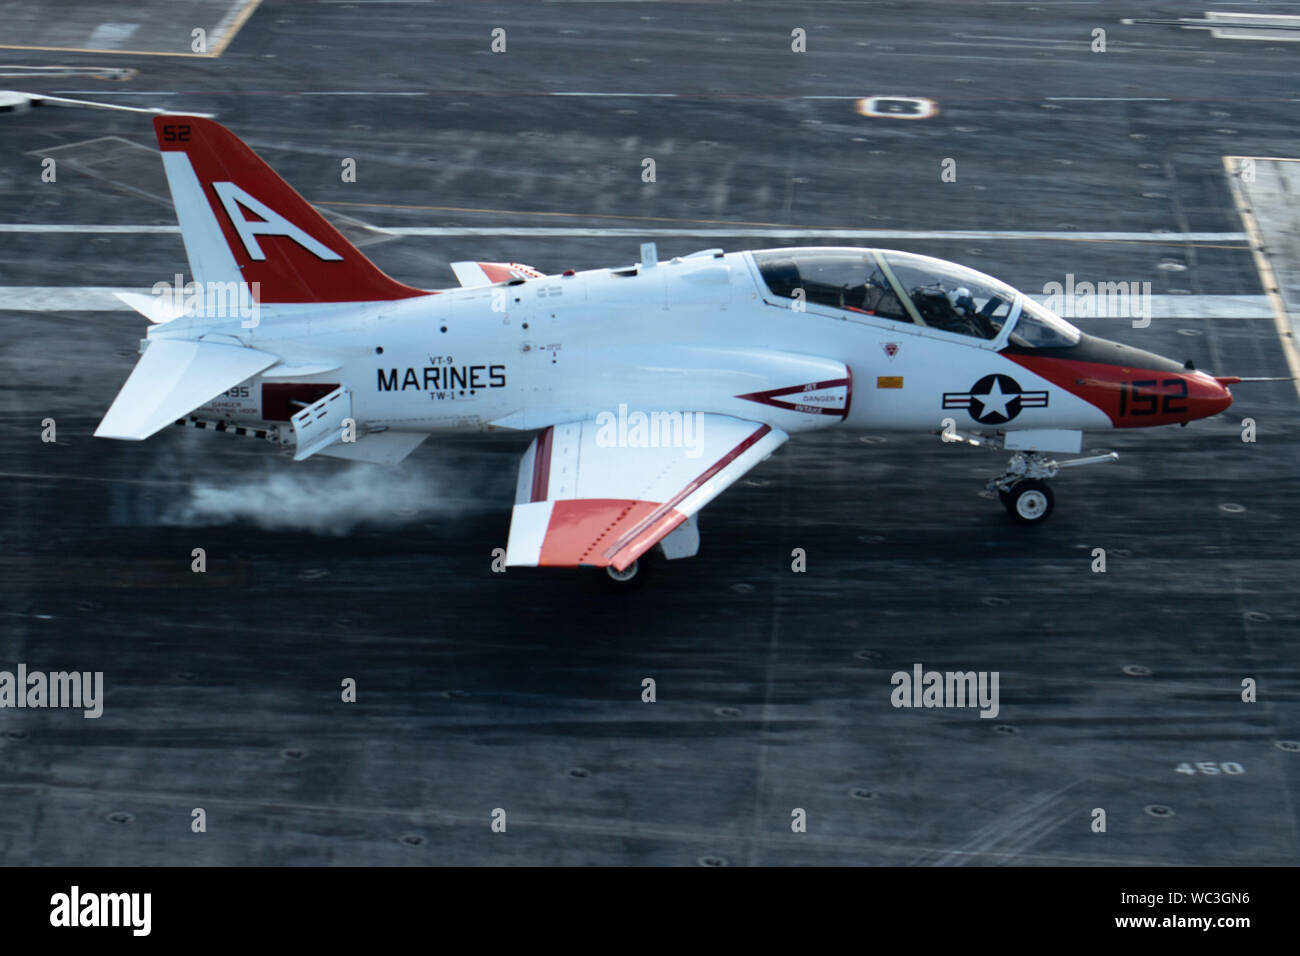 A T-45C Goshawk training aircraft, assigned to Training Air Wing (TW) 1, performs a touch-and-go on the flight deck of the aircraft carrier USS John C. Stennis (CVN 74) in the Atlantic Ocean, Aug. 24, 2019. The John C. Stennis is underway conducting carrier qualifications in support of Chief of Naval Air Training Command. (U.S. Navy photo by Mass Communication Specialist 3rd Class Rebekah M. Rinckey) Stock Photo